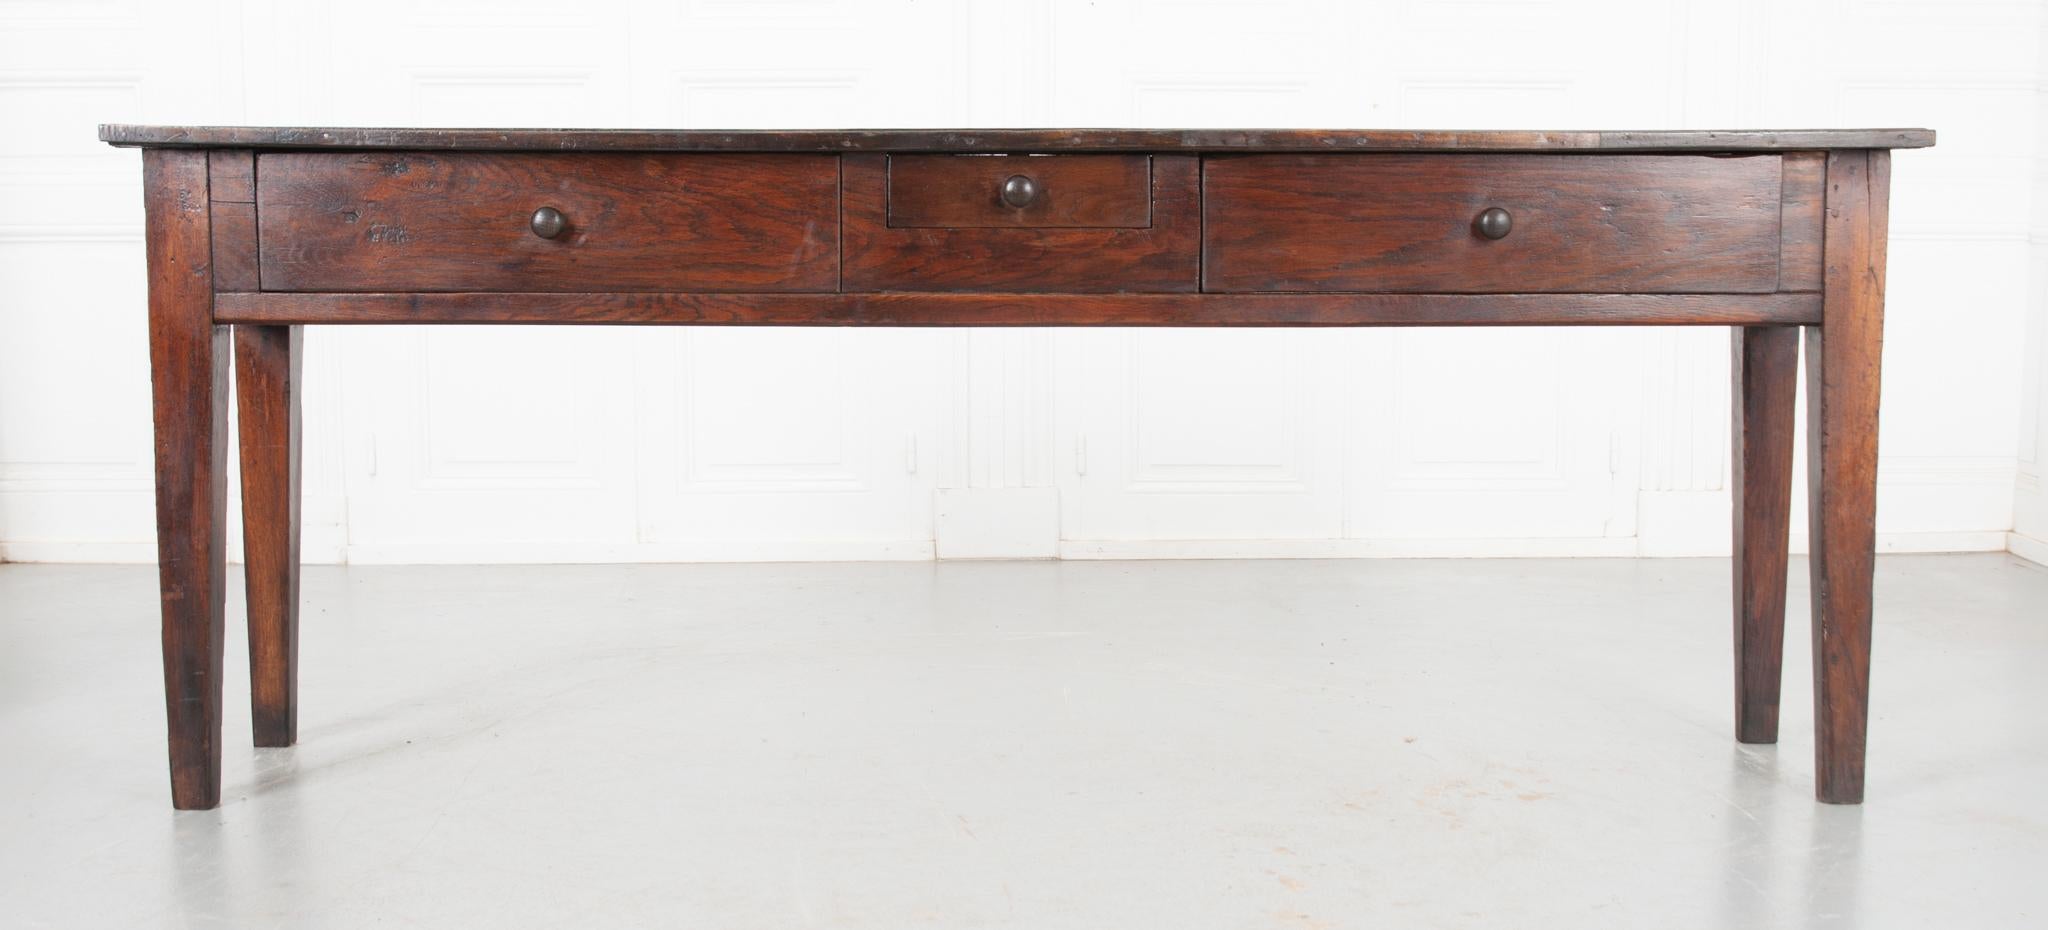 This provincial low table has a beautiful patina top, made from two planks of solid oak nailed together to form a narrow surface. Housed in the apron are three drawers of two different sizes all fitted with turned wooden pulls, offering plenty of